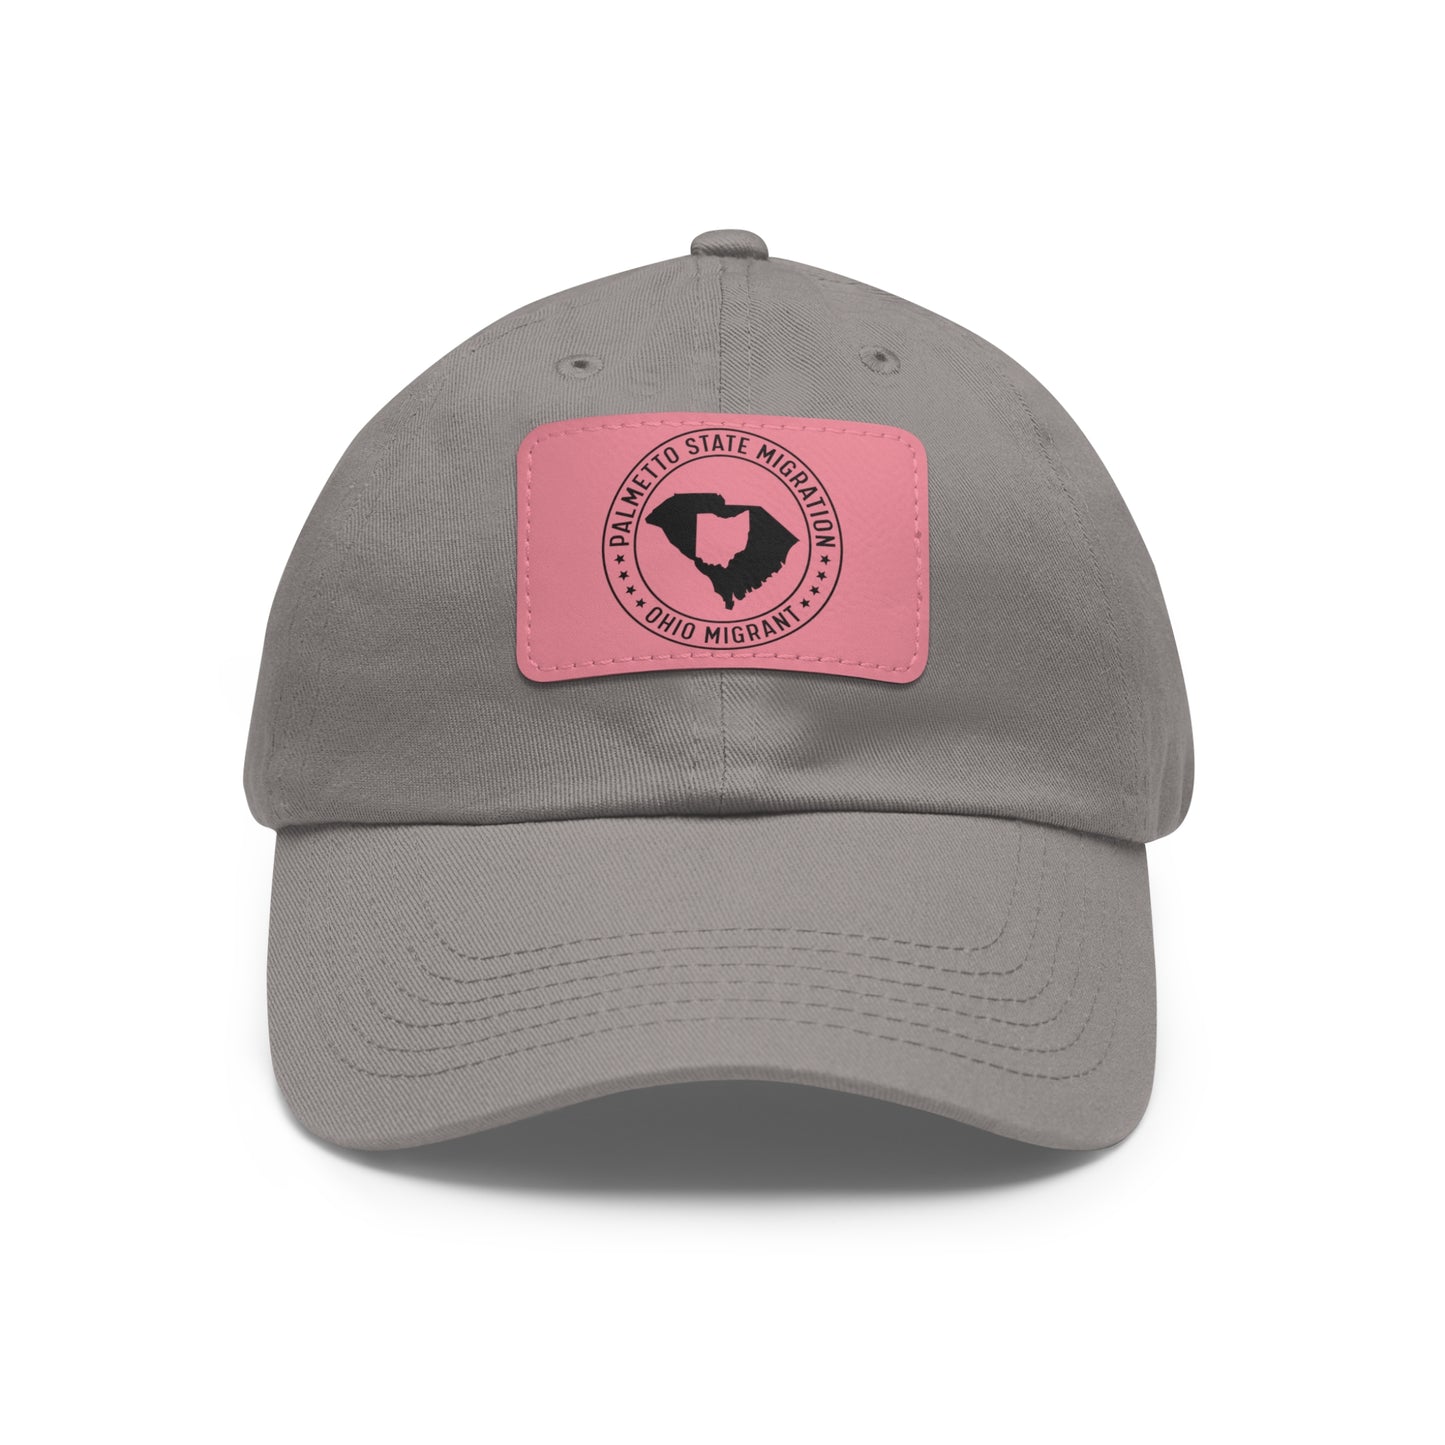 Ohio Migrant Dad Hat with Leather Patch